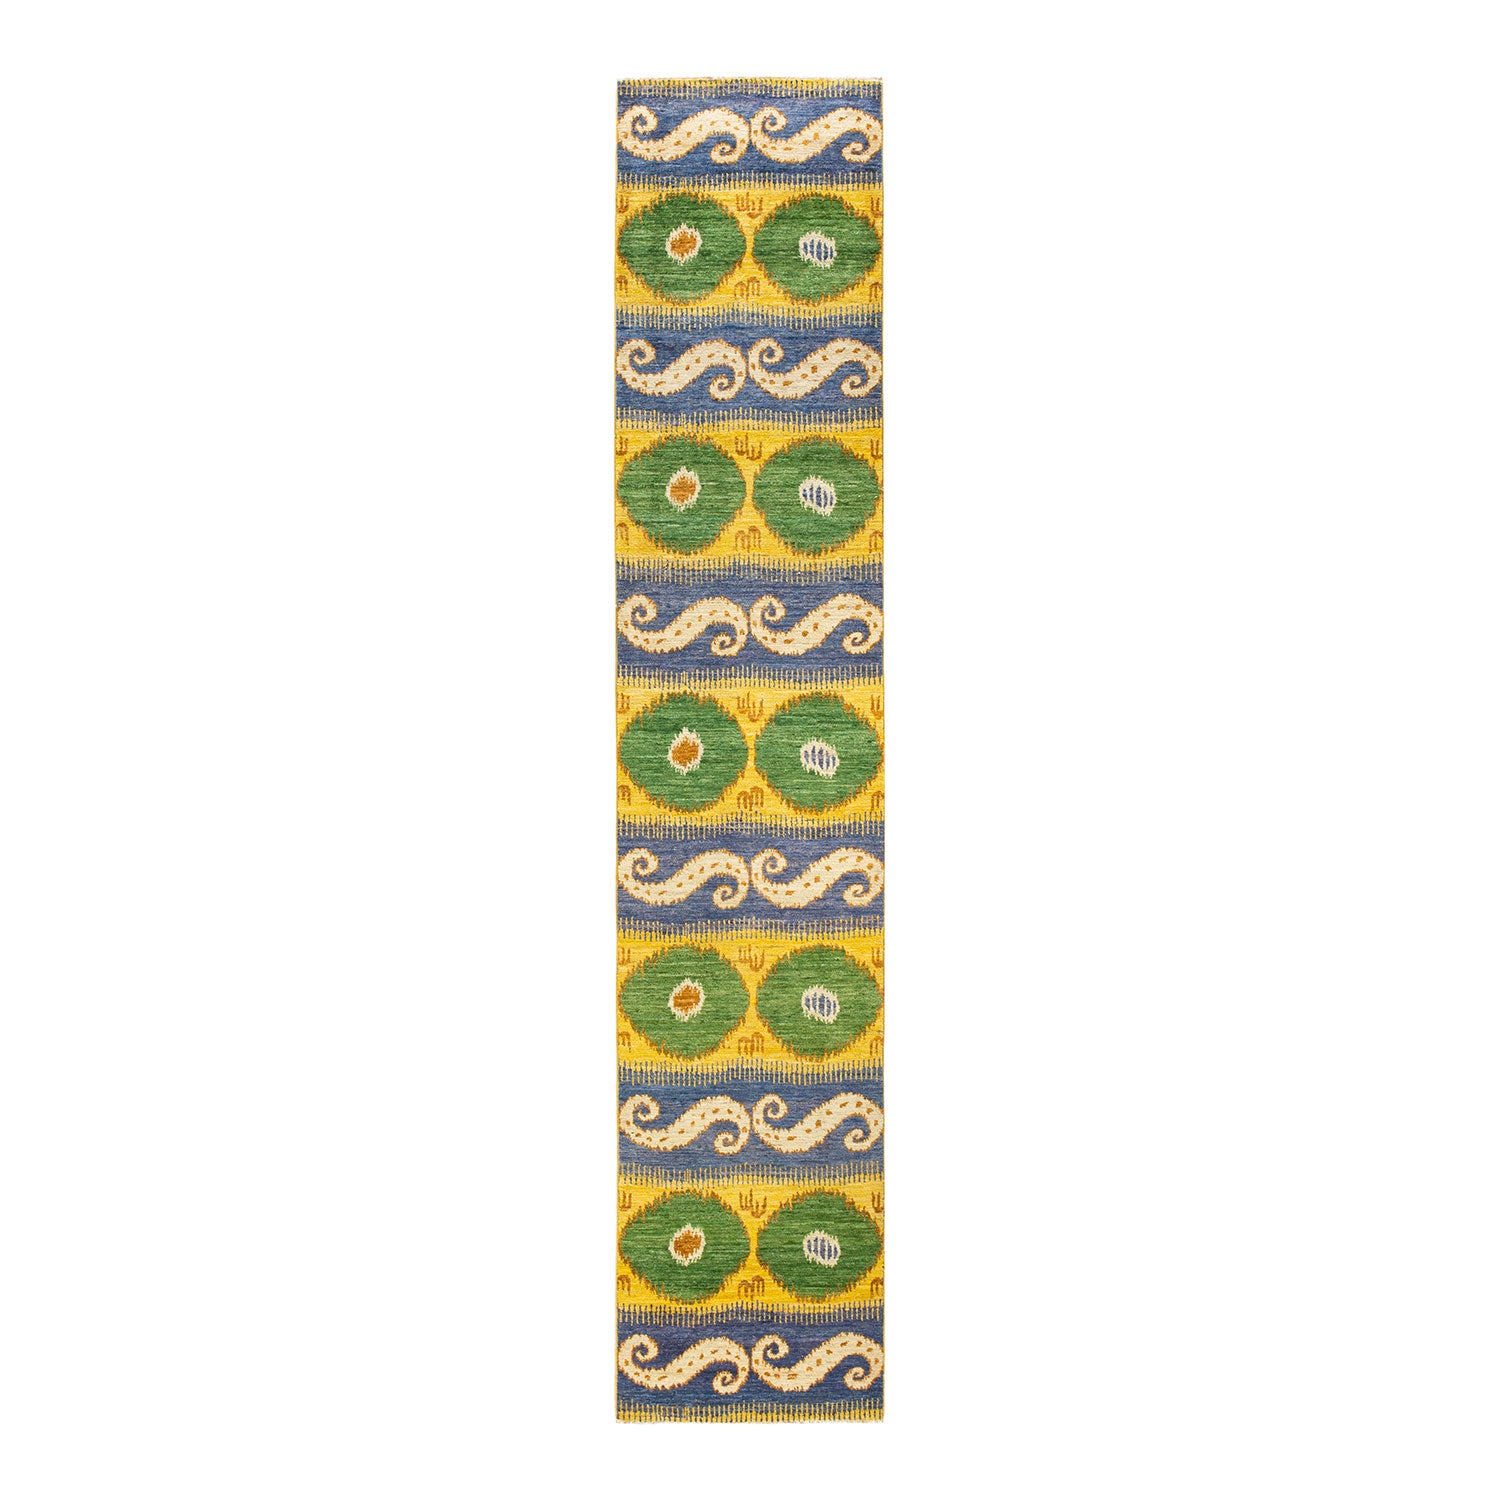 Vibrant textile with stylized motifs in blue, green, and yellow.